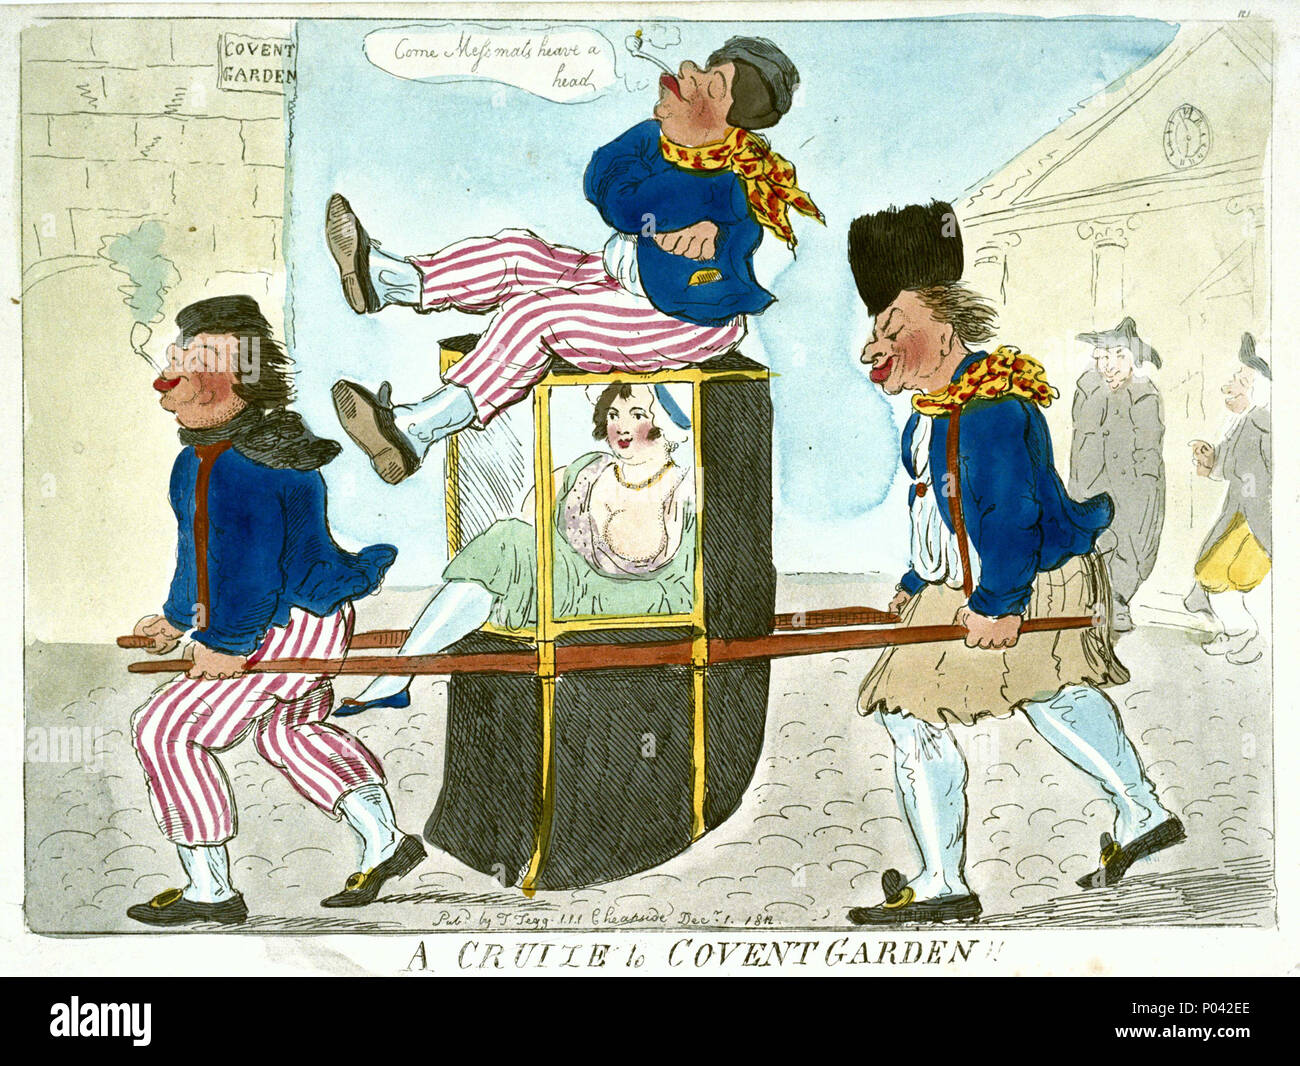 .  English: A Cruize to Covent Garden!! (caricature) Hand-coloured.; Page No.121.  . 1 December 1812.    Thomas Tegg  (1776–1845)    Description British publisher, printer, bookseller and stationer English publisher  Date of birth/death 4 March 1776 21 April 1845  Location of birth/death Wimbledon Wimbledon  Work period 1799-1846  Work location London  Authority control  : Q7794394 VIAF:?2902902 ISNI:?0000 0000 8351 1340 LCCN:?no89020646 GND:?104331933 SUDOC:?159196906 WorldCat 76 A Cruize to Covent Garden!! (caricature) RMG PW3832 Stock Photo